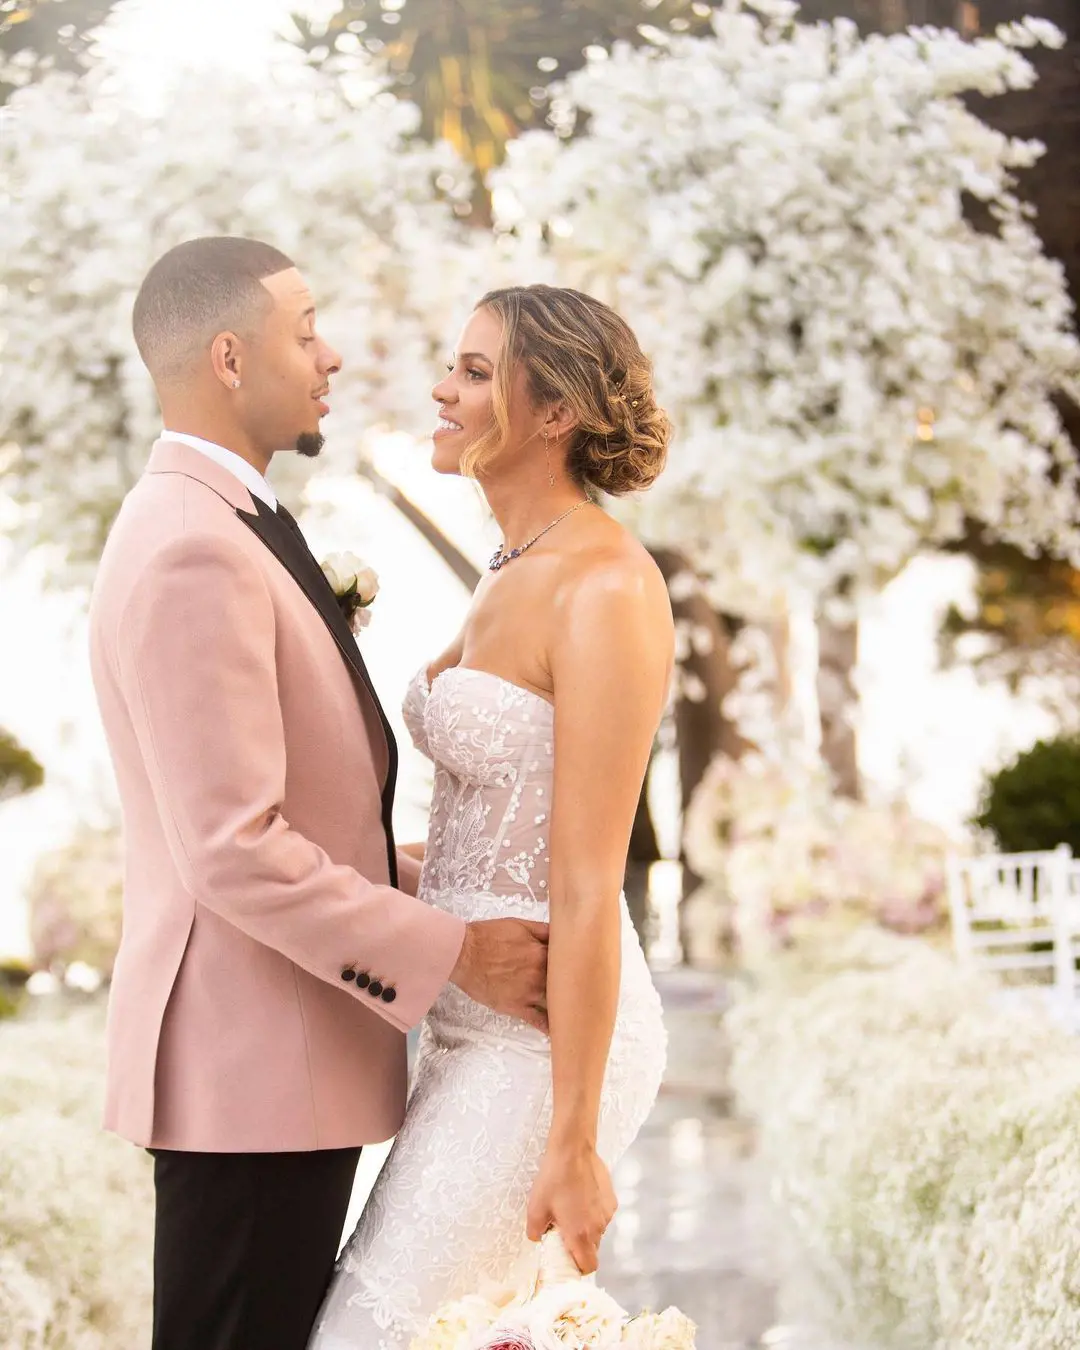 Seth Curry Doc Rivers daughter Callie during their wedding day in 2019 